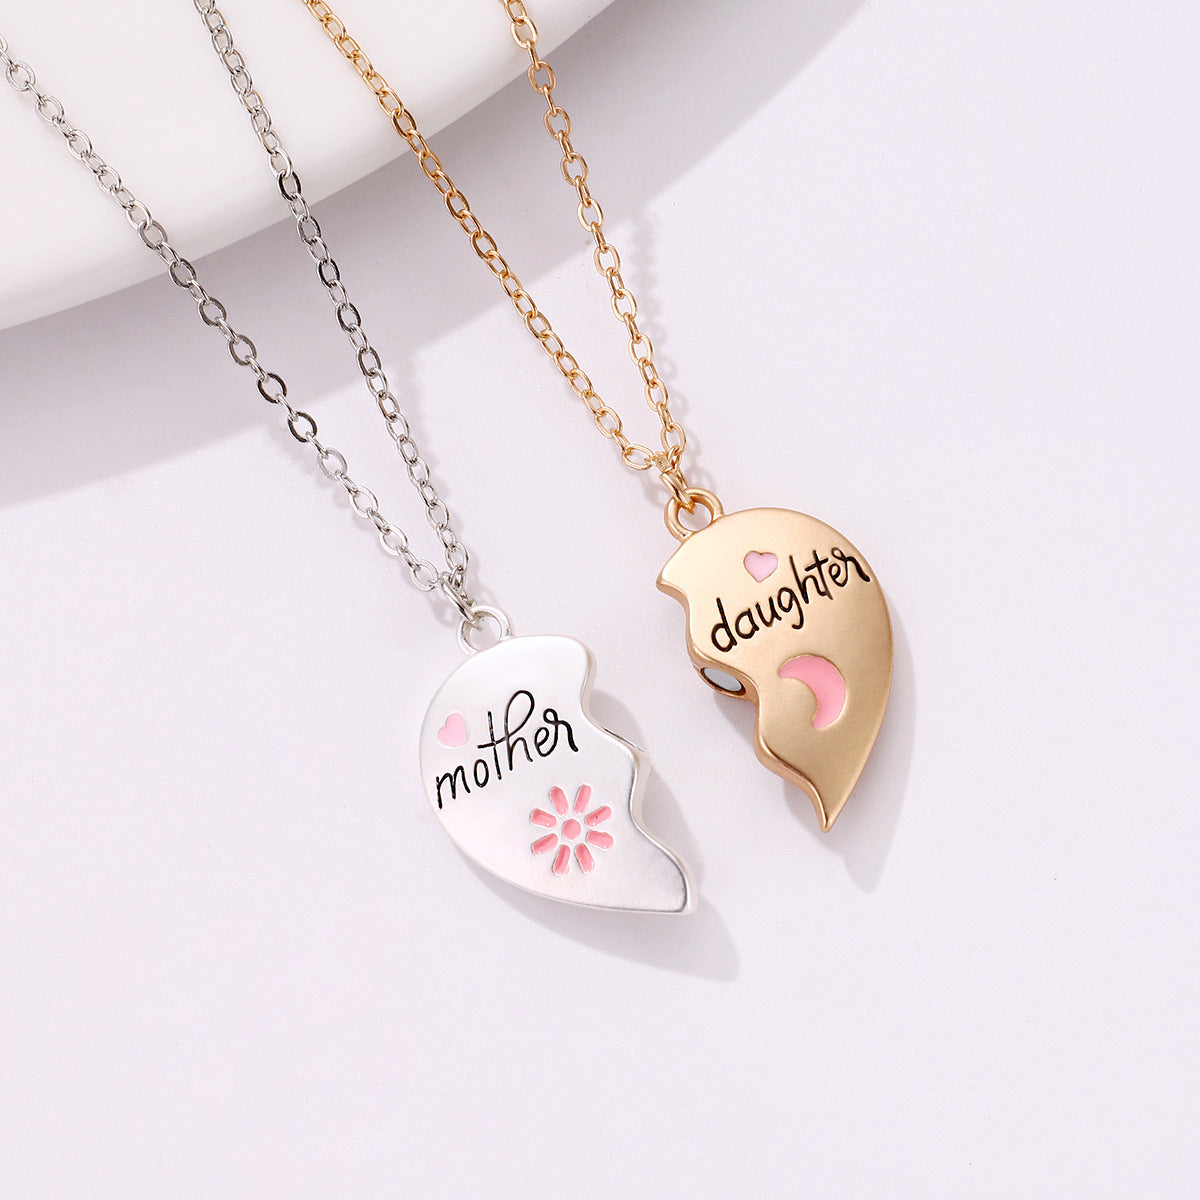 2PCS Set Jewelry Mother Daughter Necklace Matching Heart Magnetic Pendant Fashion Gifts For Mother's Day